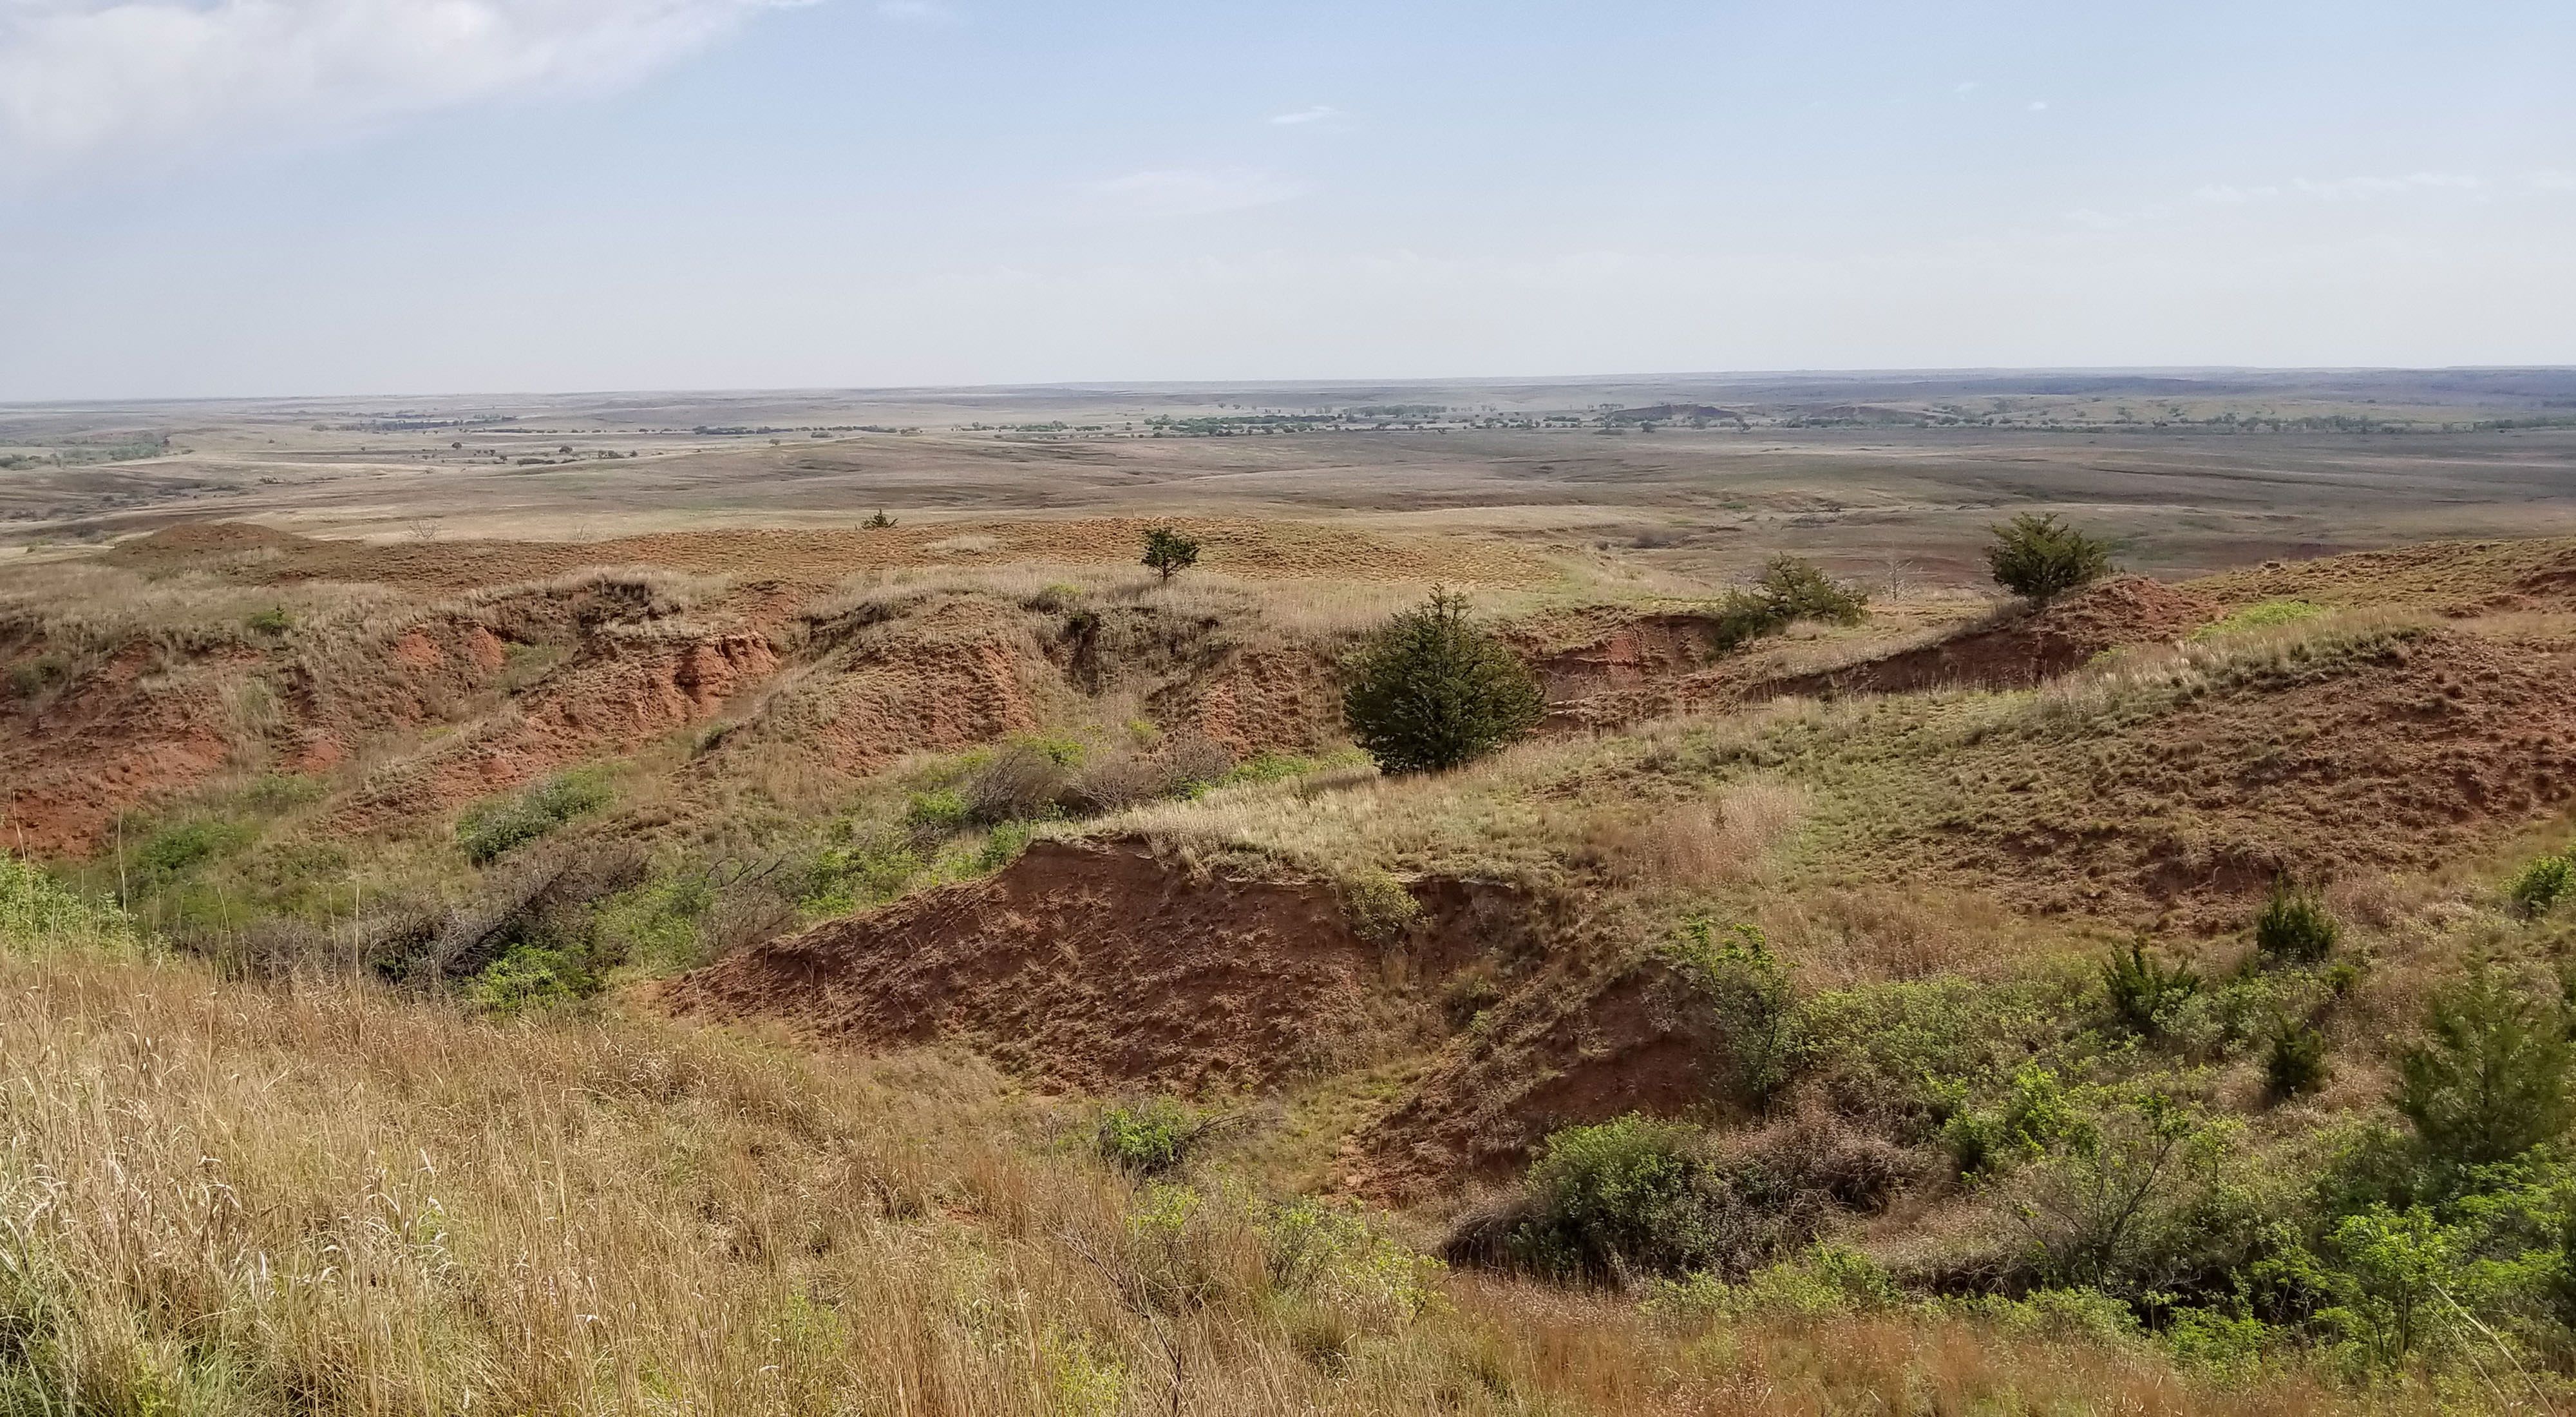 The oxidated iron in the soil gives the Red Hills their name. Also known as the Gypsum or Gyp Hills, the mixed-grass native prairie of the region extends into Oklahoma.